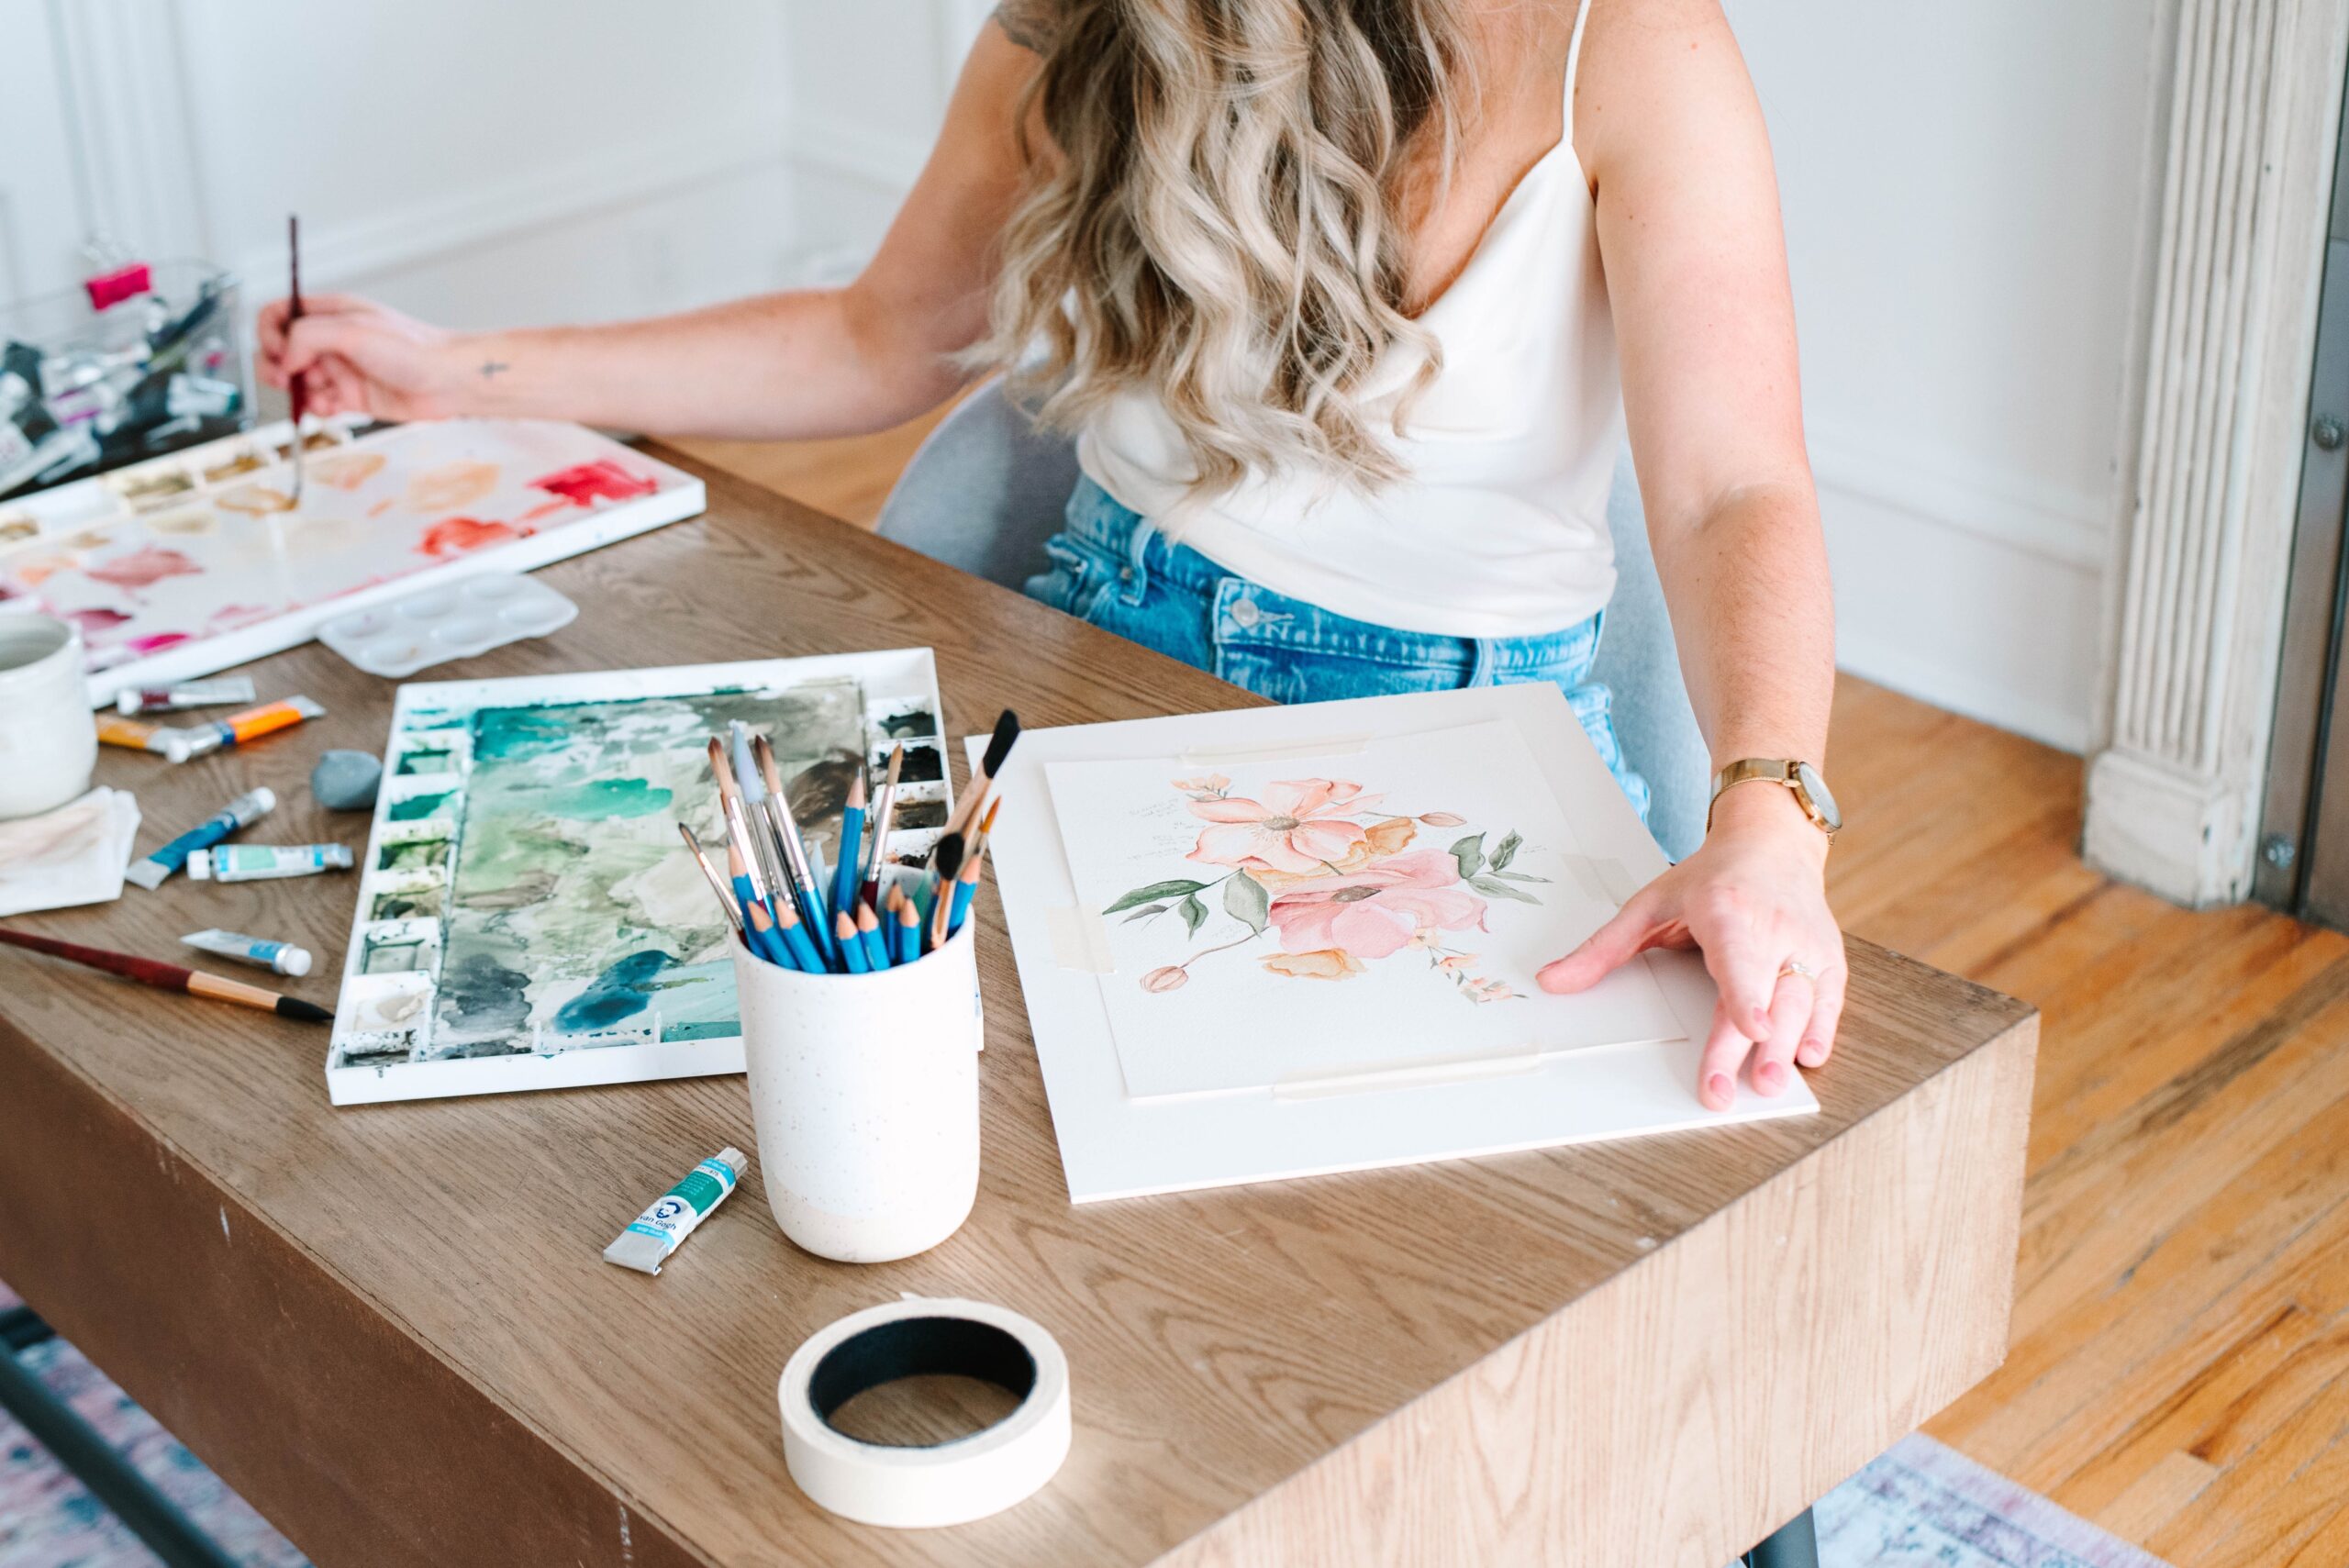 calgary brand photographer ; watercolour artist painting a floral bouquet